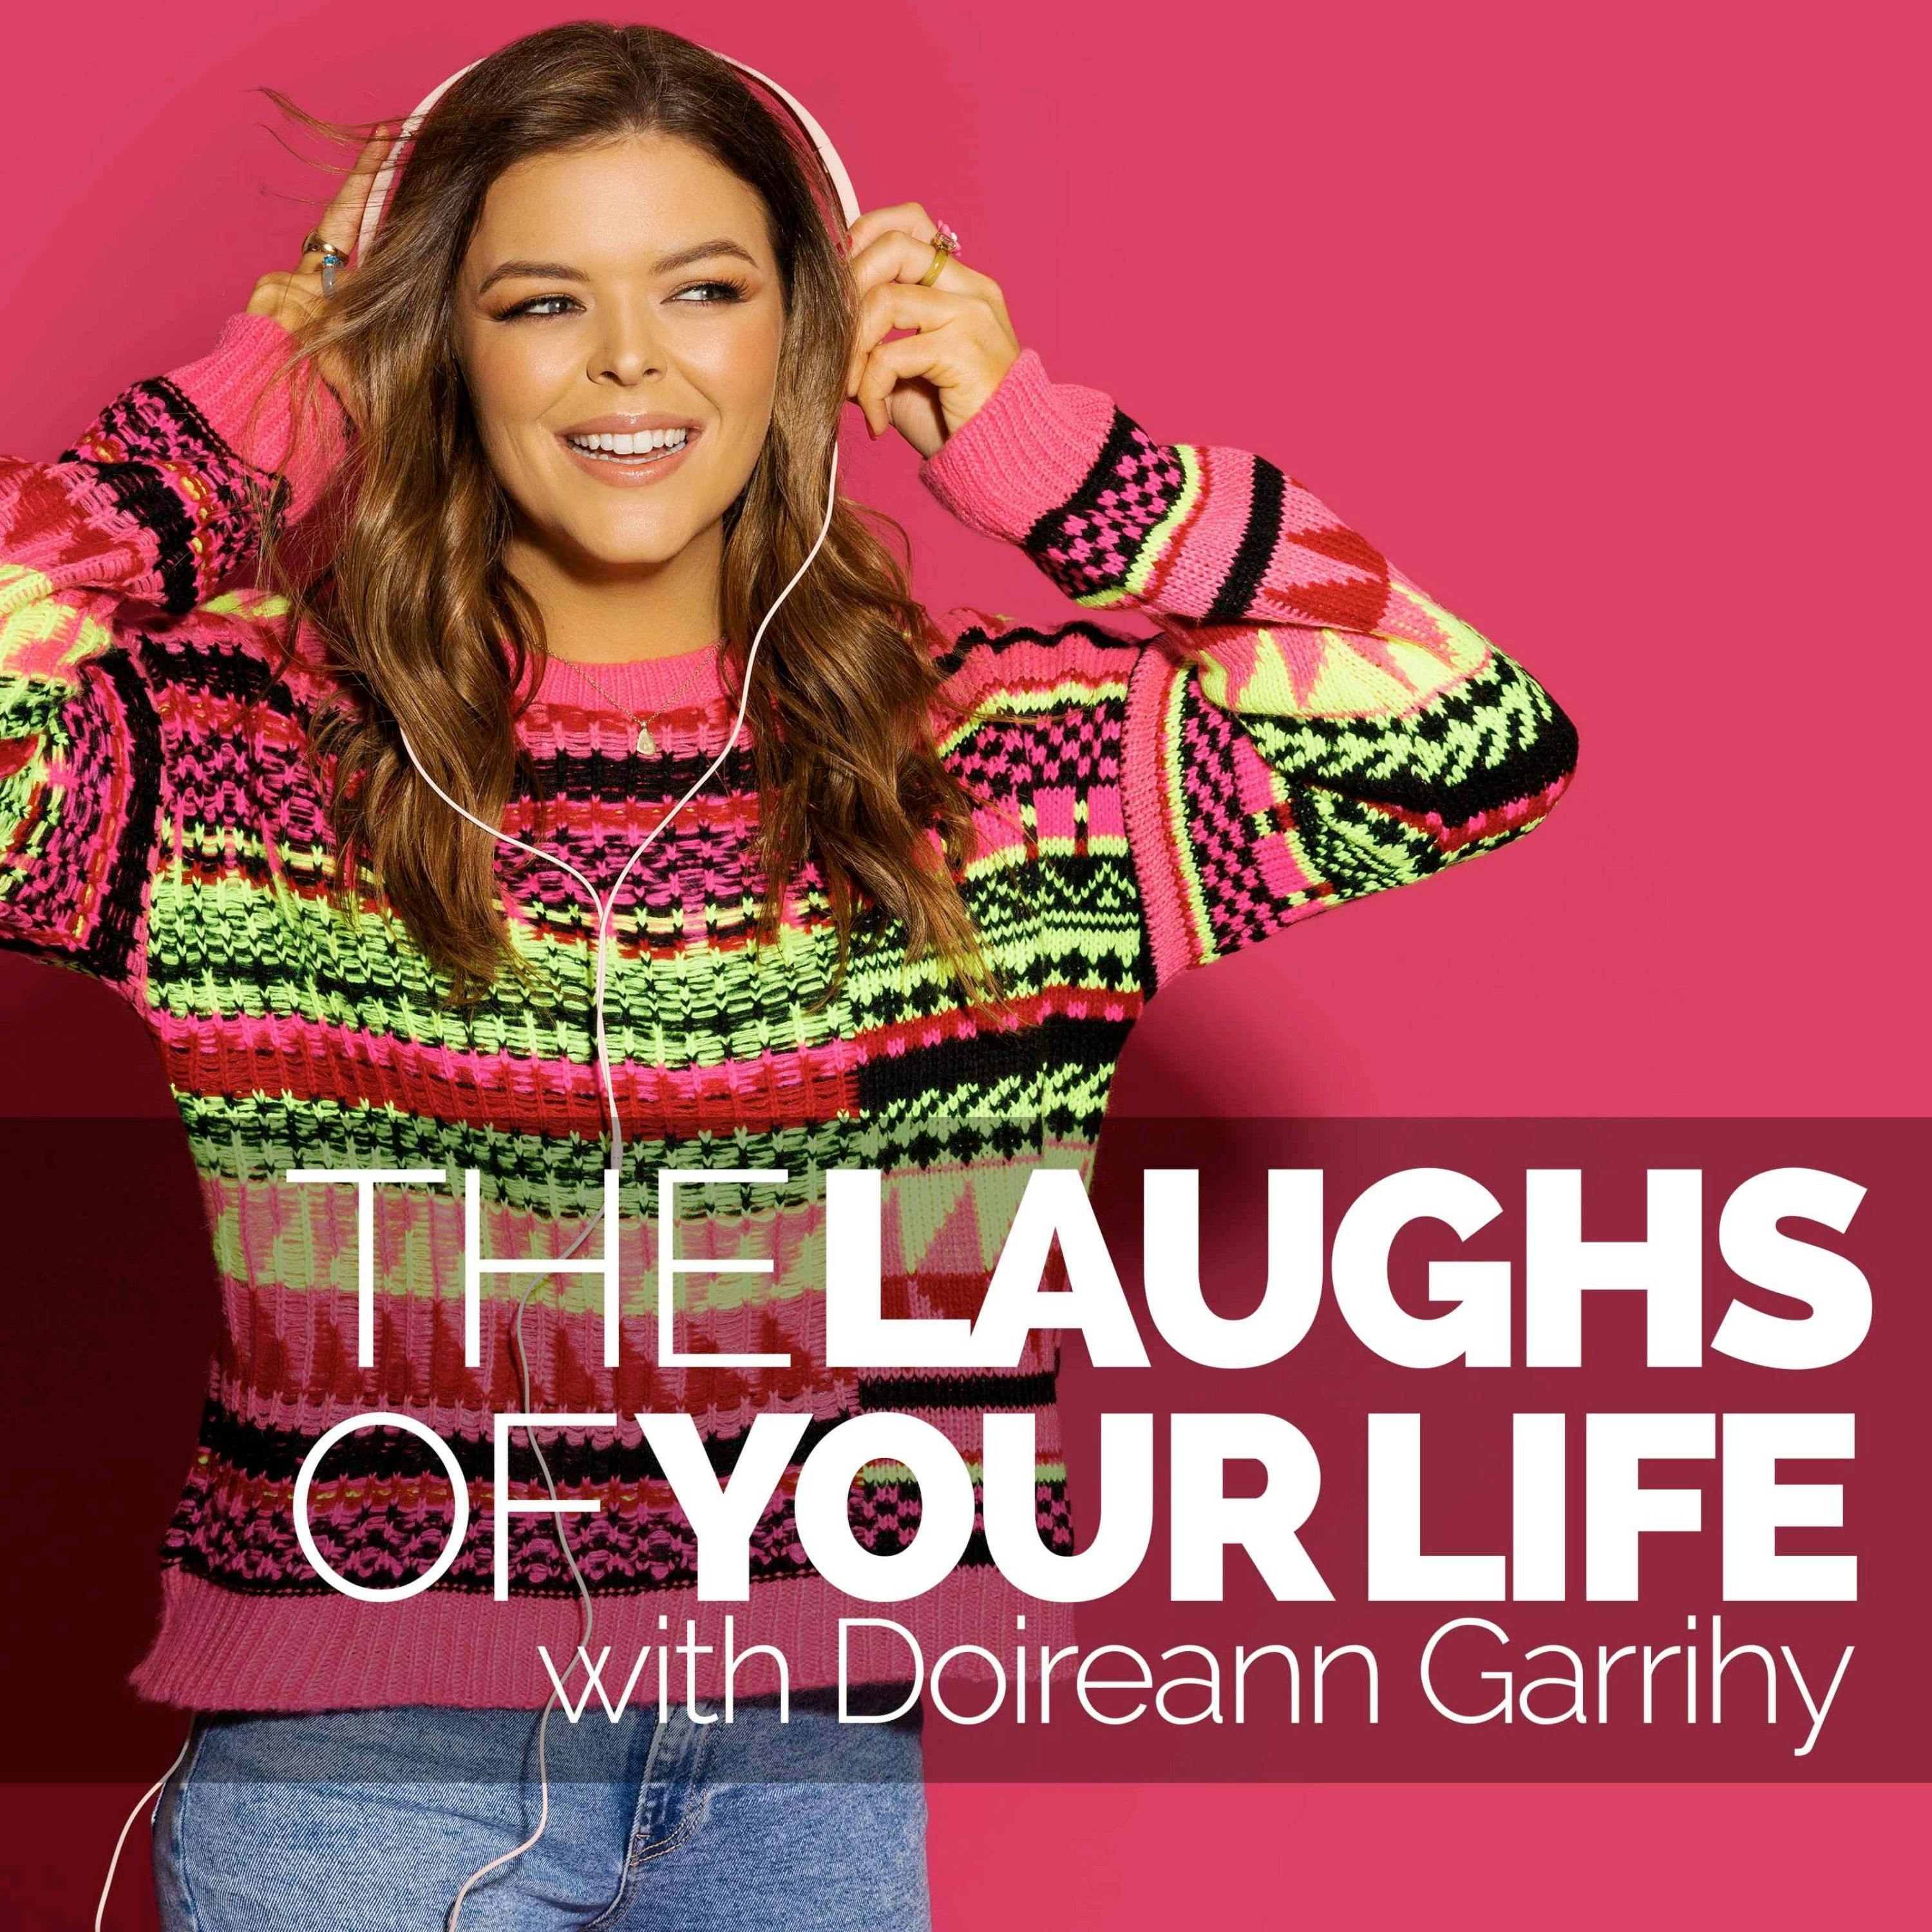 The Laughs of Your Life with Doireann Garrihy